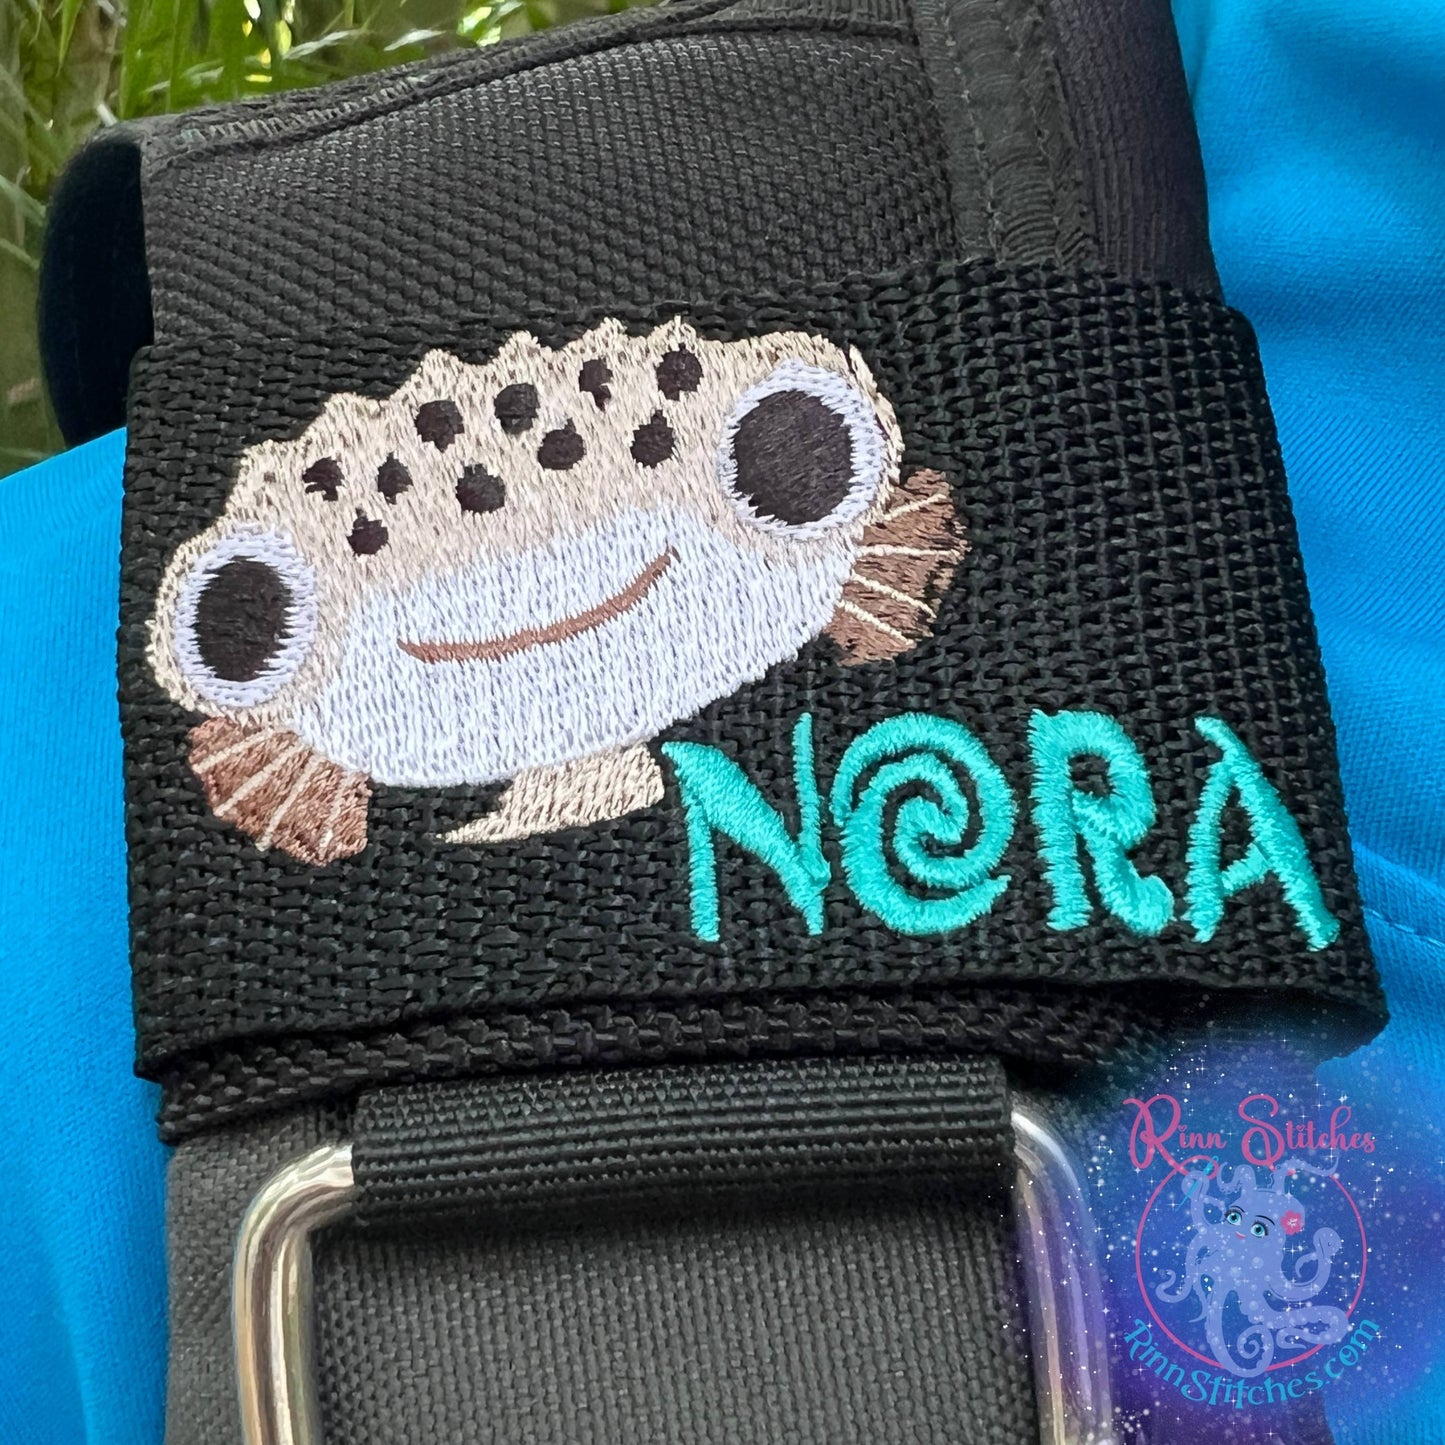 Cute Puffer Fish Face Personalized & Customizable Scuba Diver BCD Identification Tag By Rinn Stitches on Maui, Hawaii